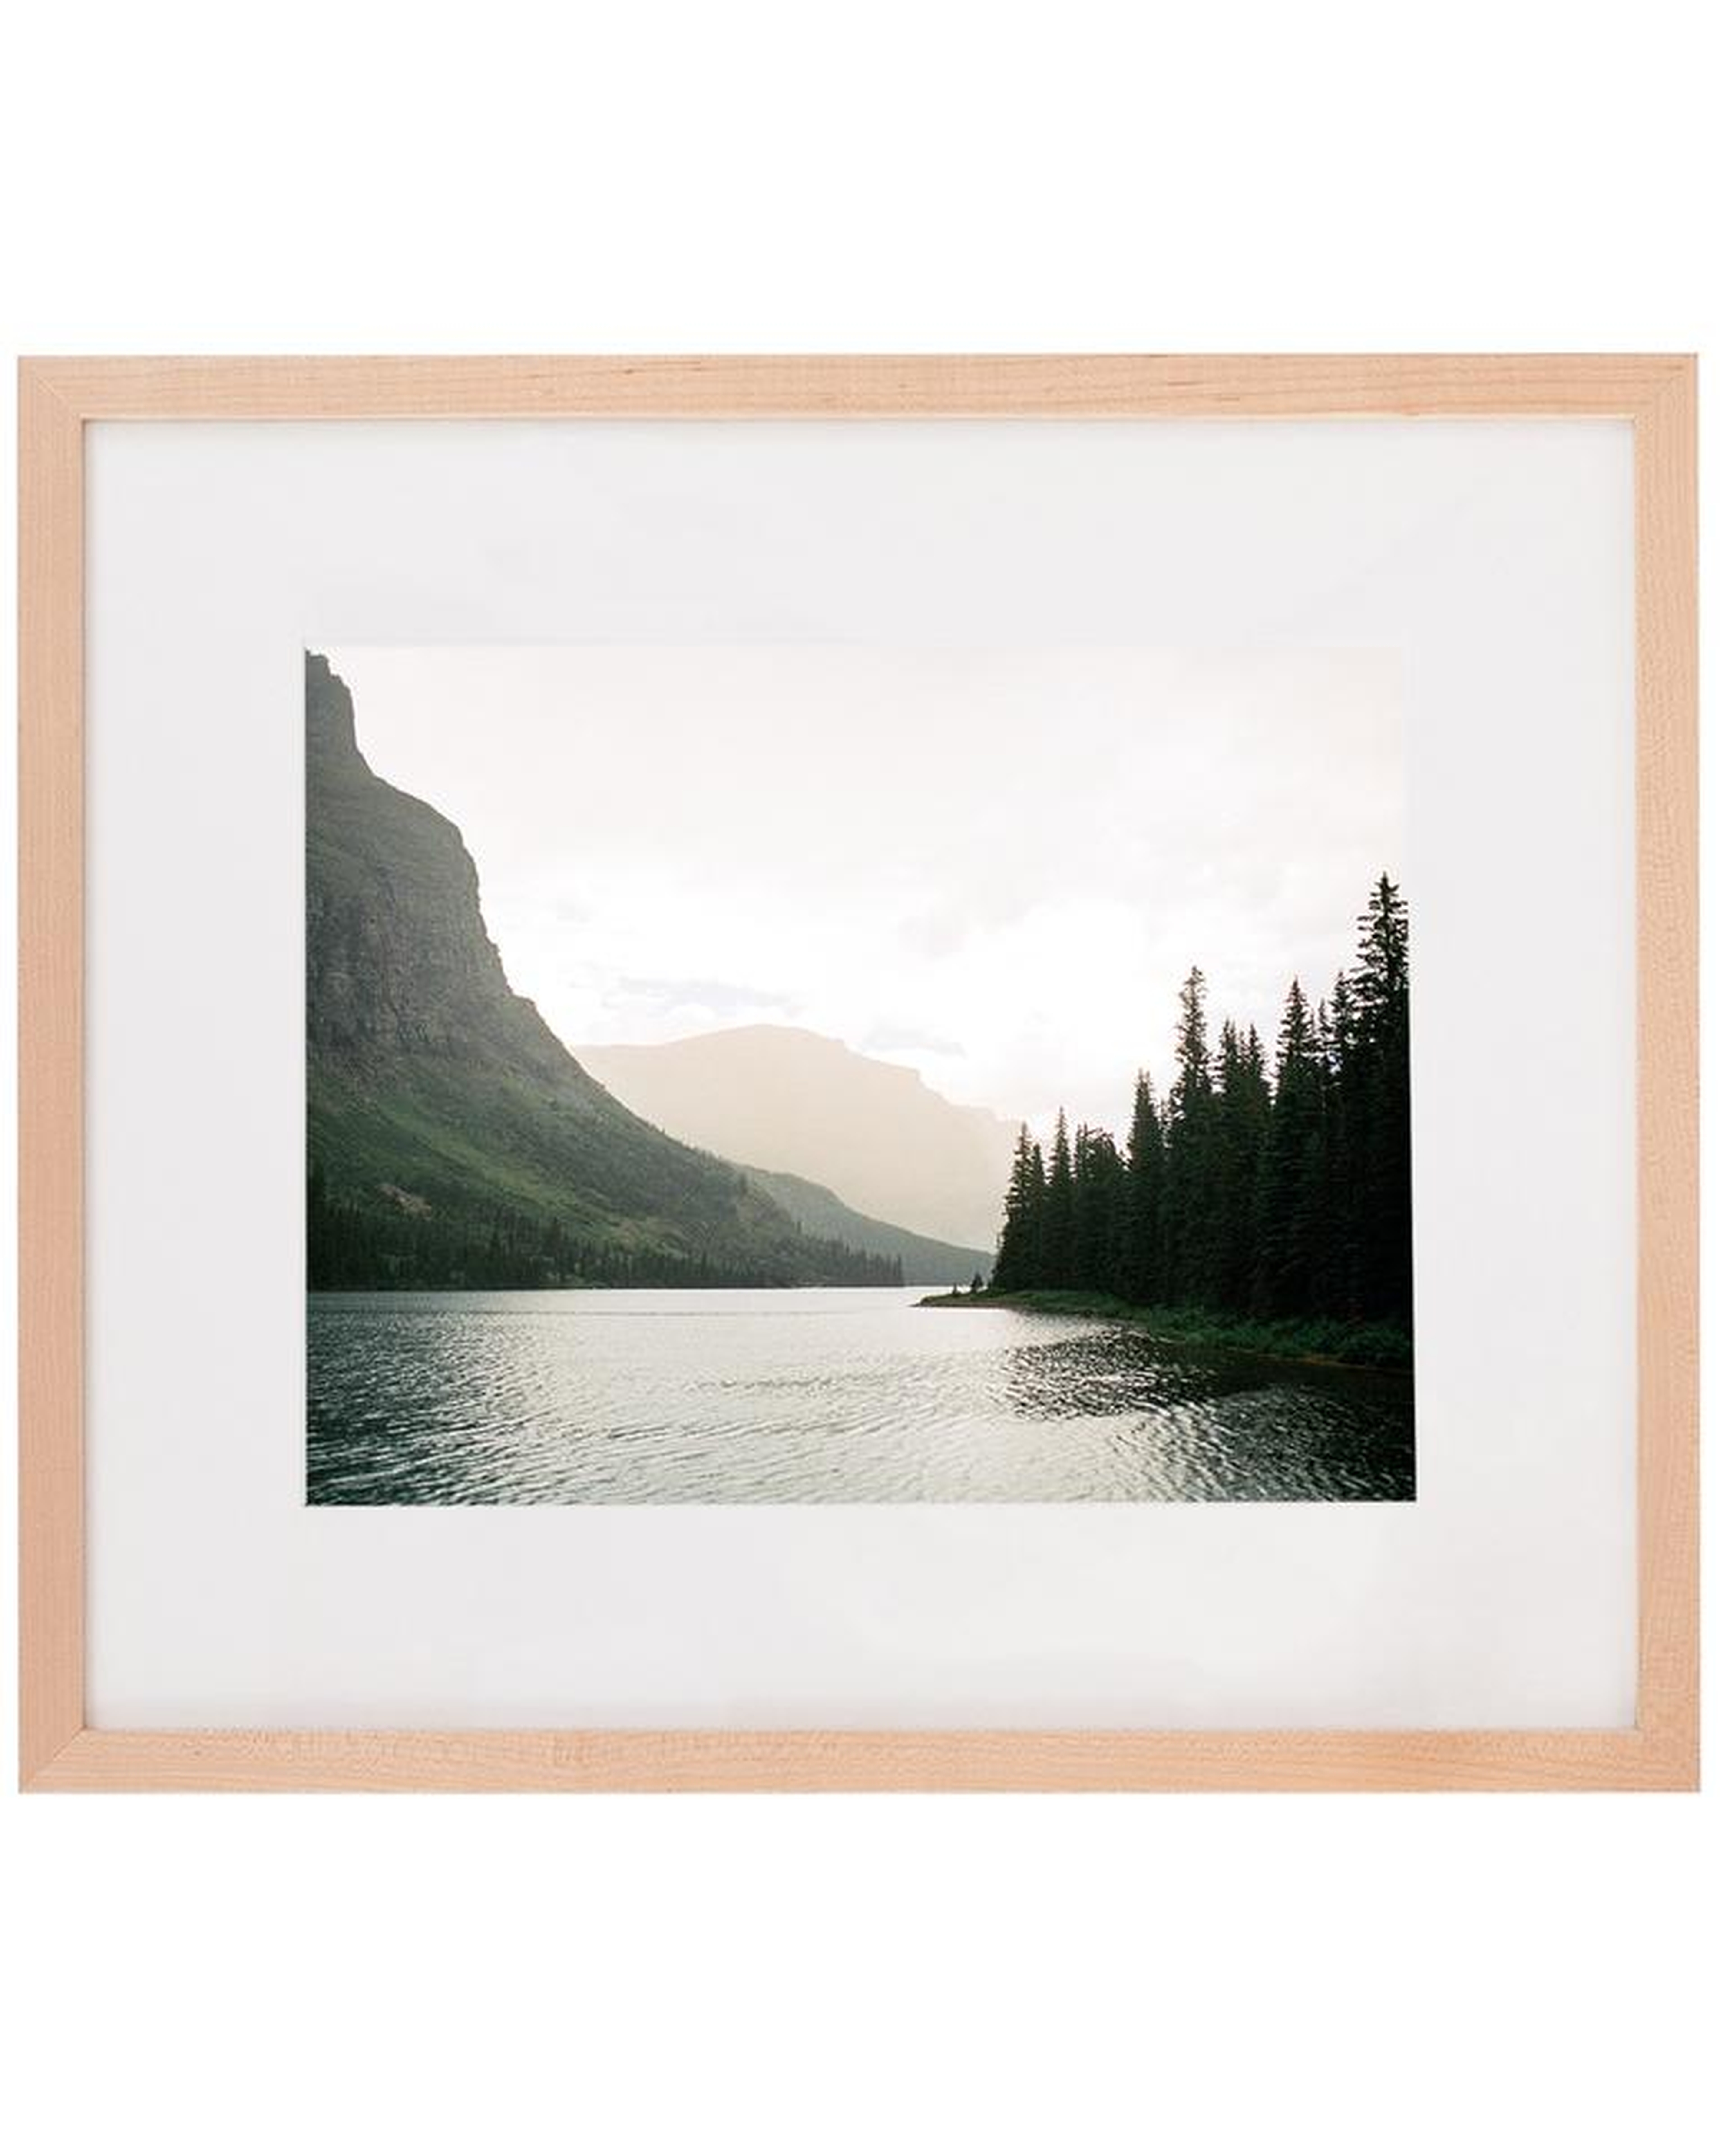 GLACIER Art with Marin Frame - 11" H x 14" W - McGee & Co.